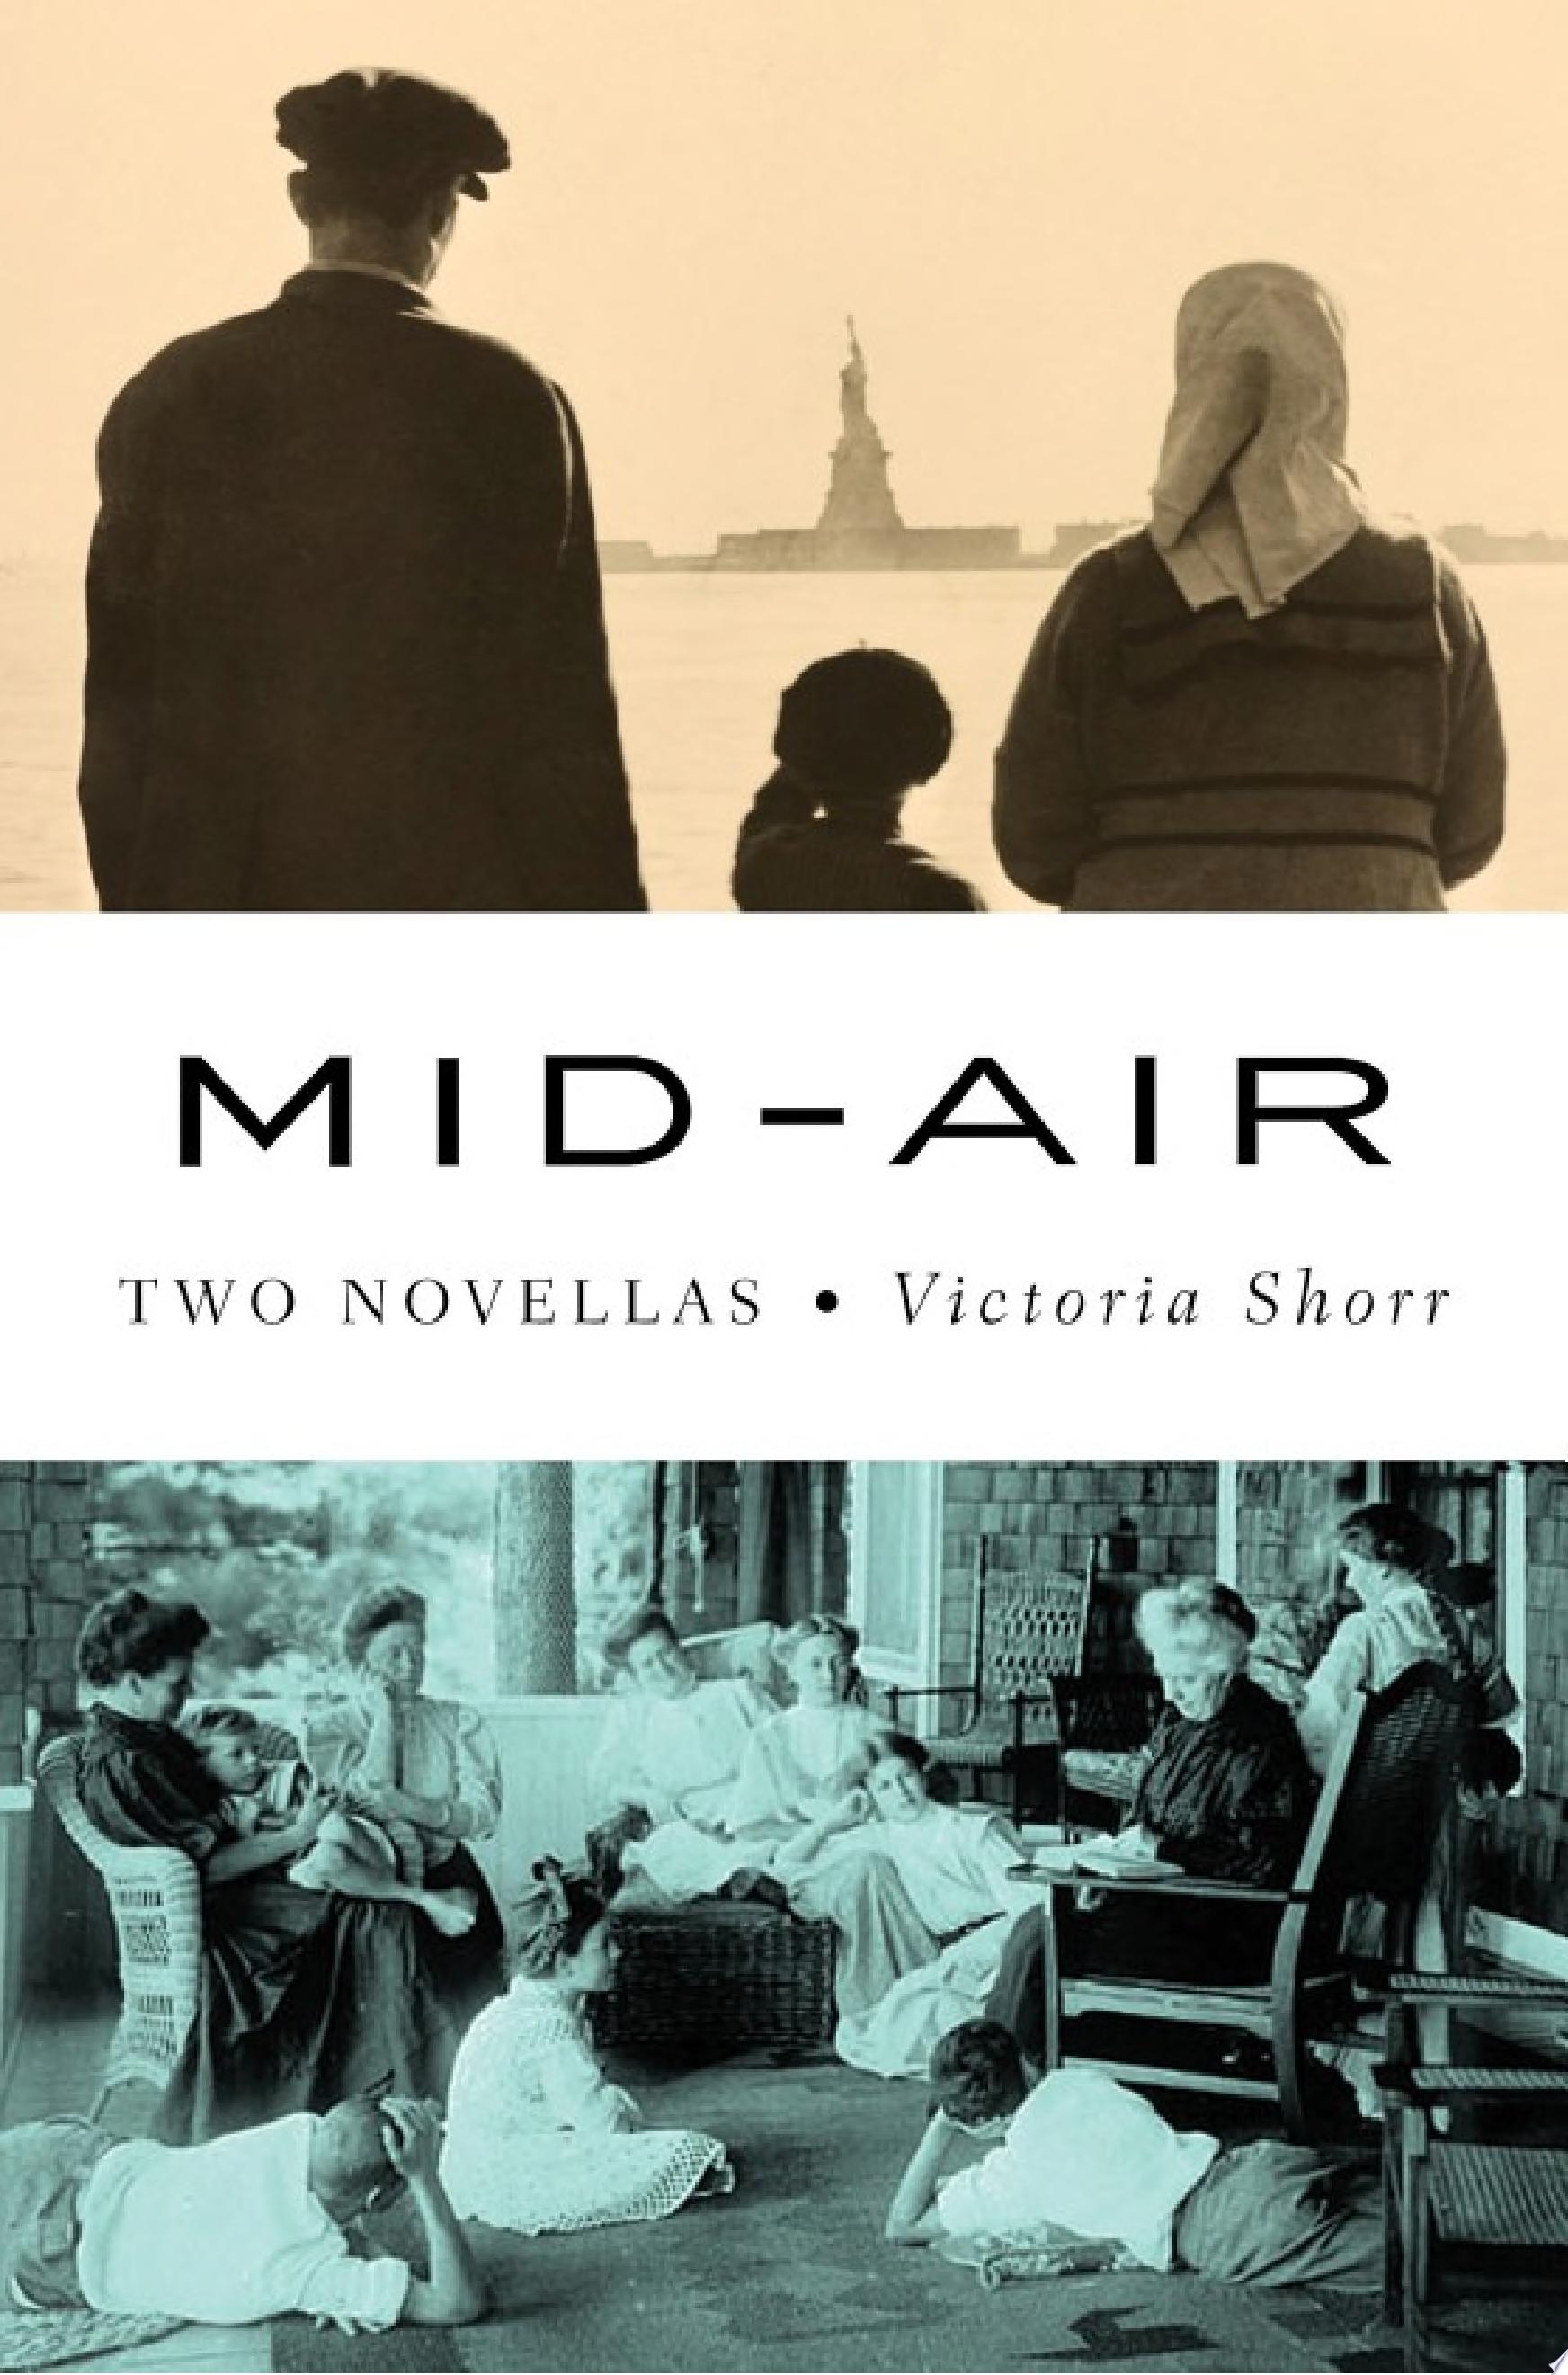 Image for "Mid-Air: Two Novellas"